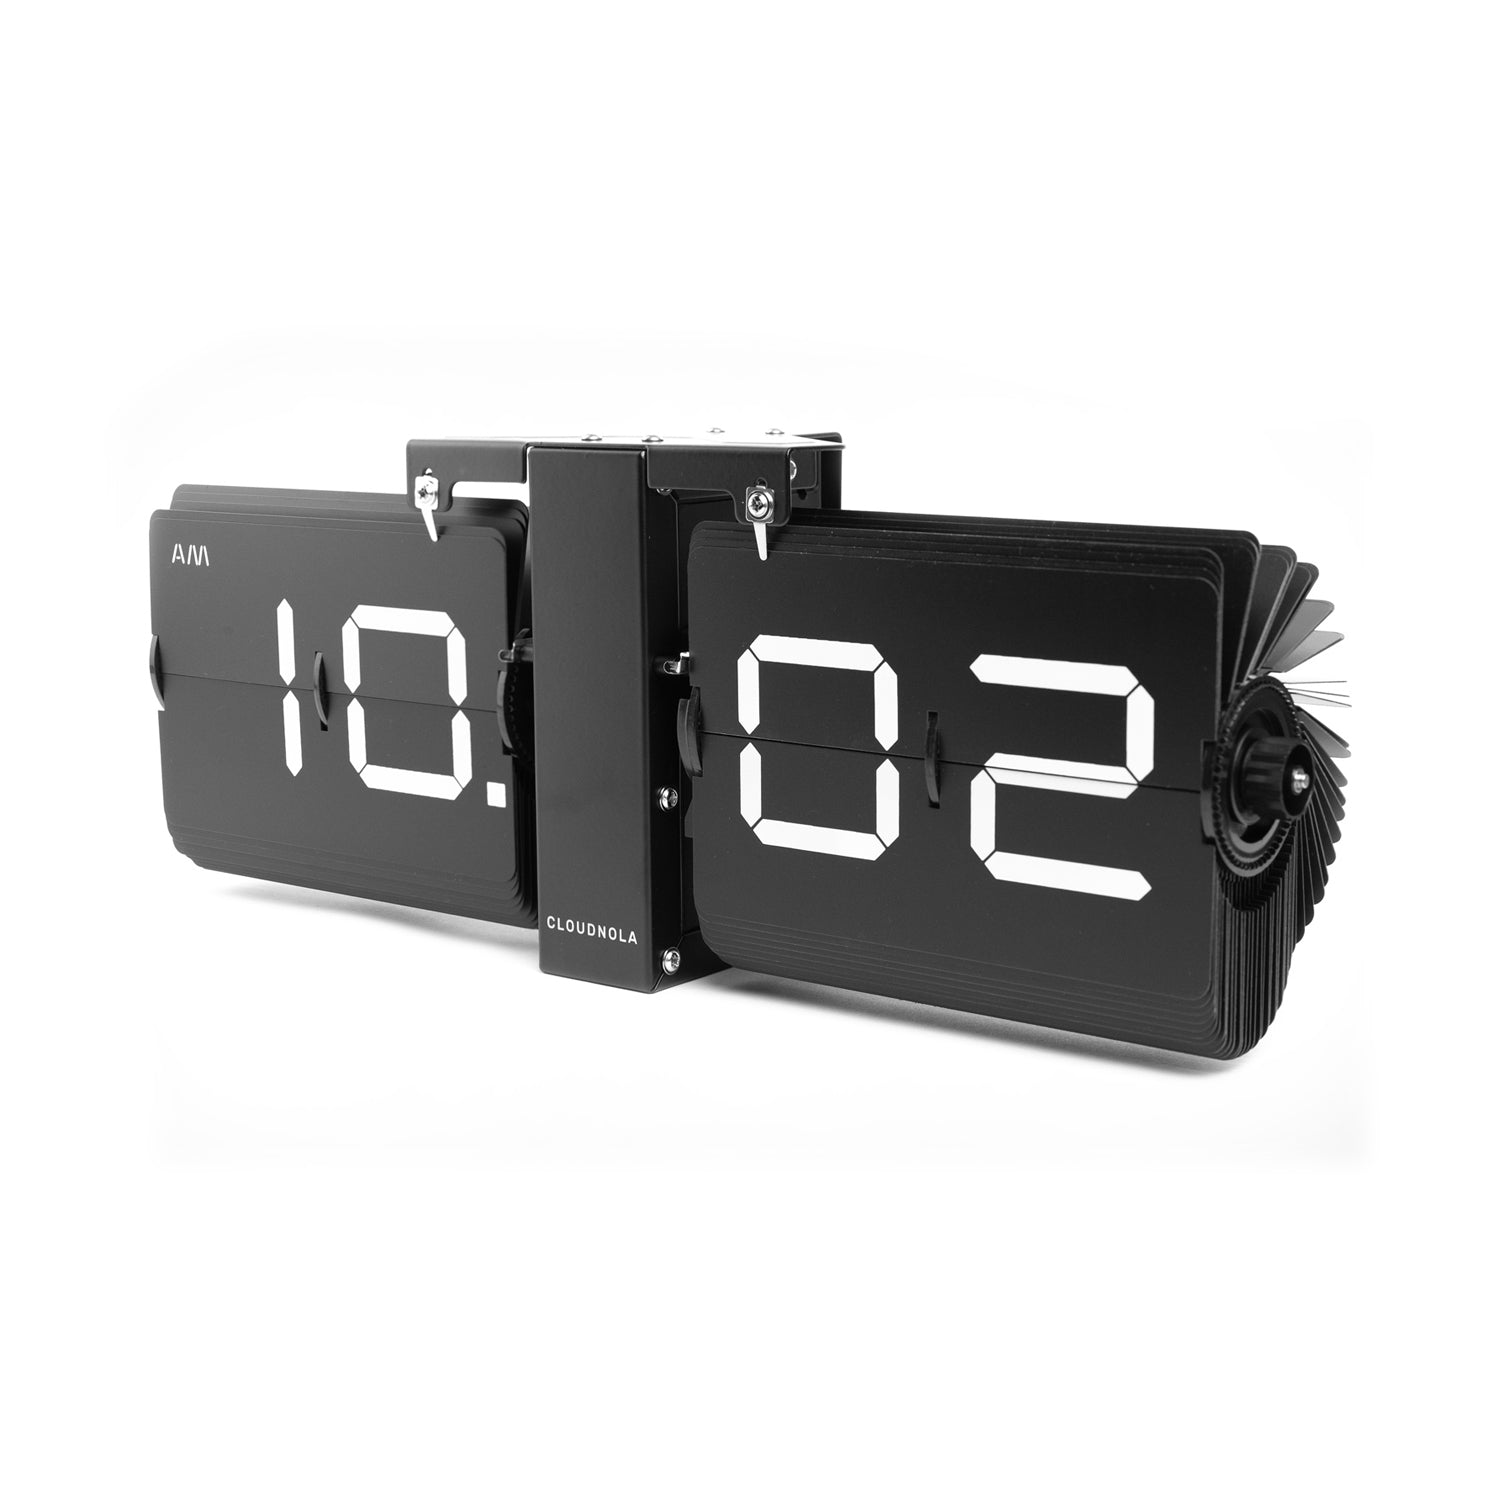 Flipping Out Black - Flip Clock - Flip Flap - Battery Operated - Table -  Wall - Text